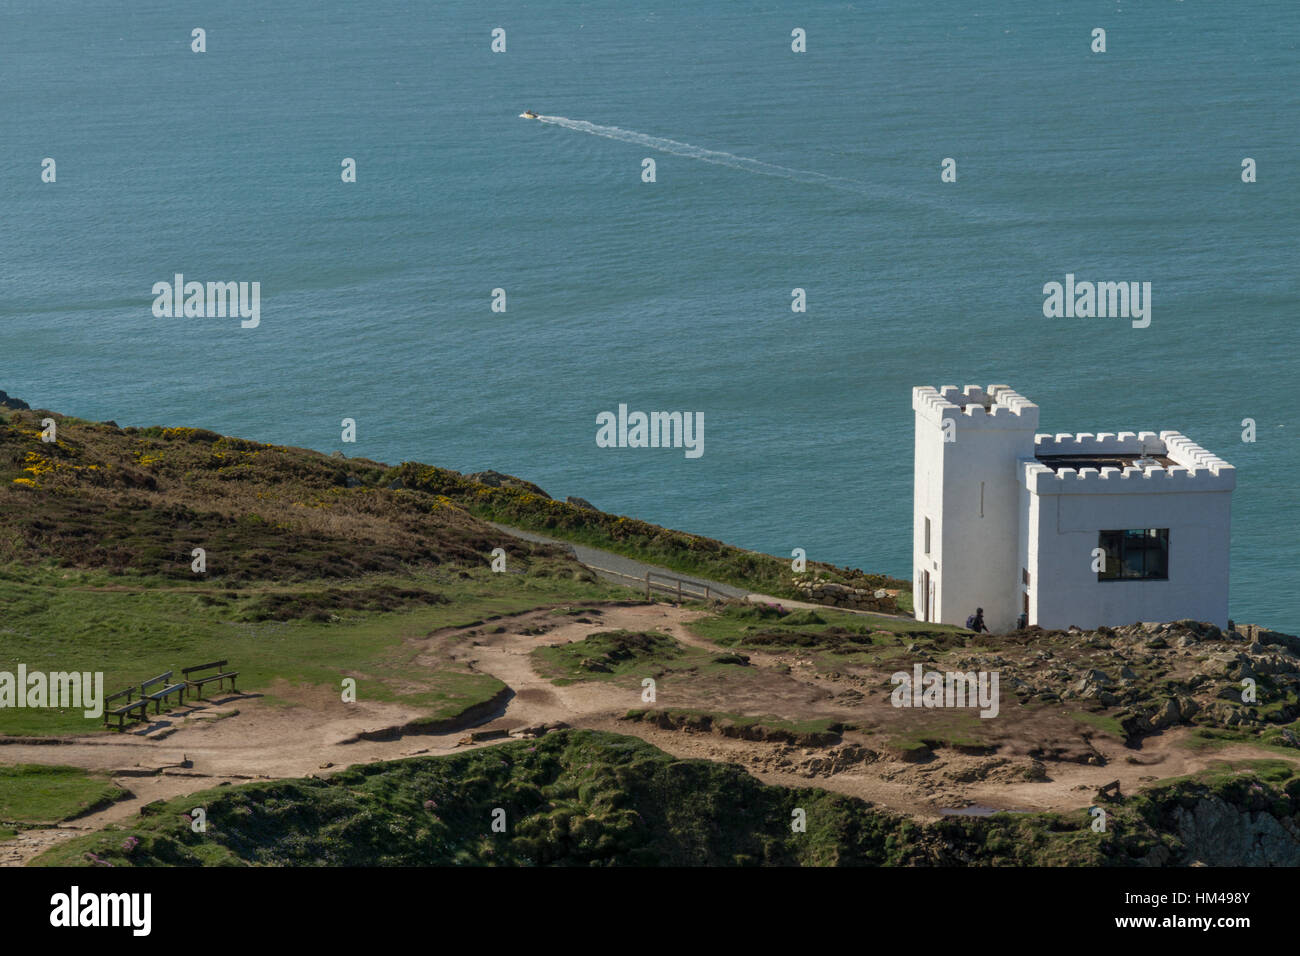 Elin's tower is a short castellated tower located near Holyhead, Wales. Stock Photo